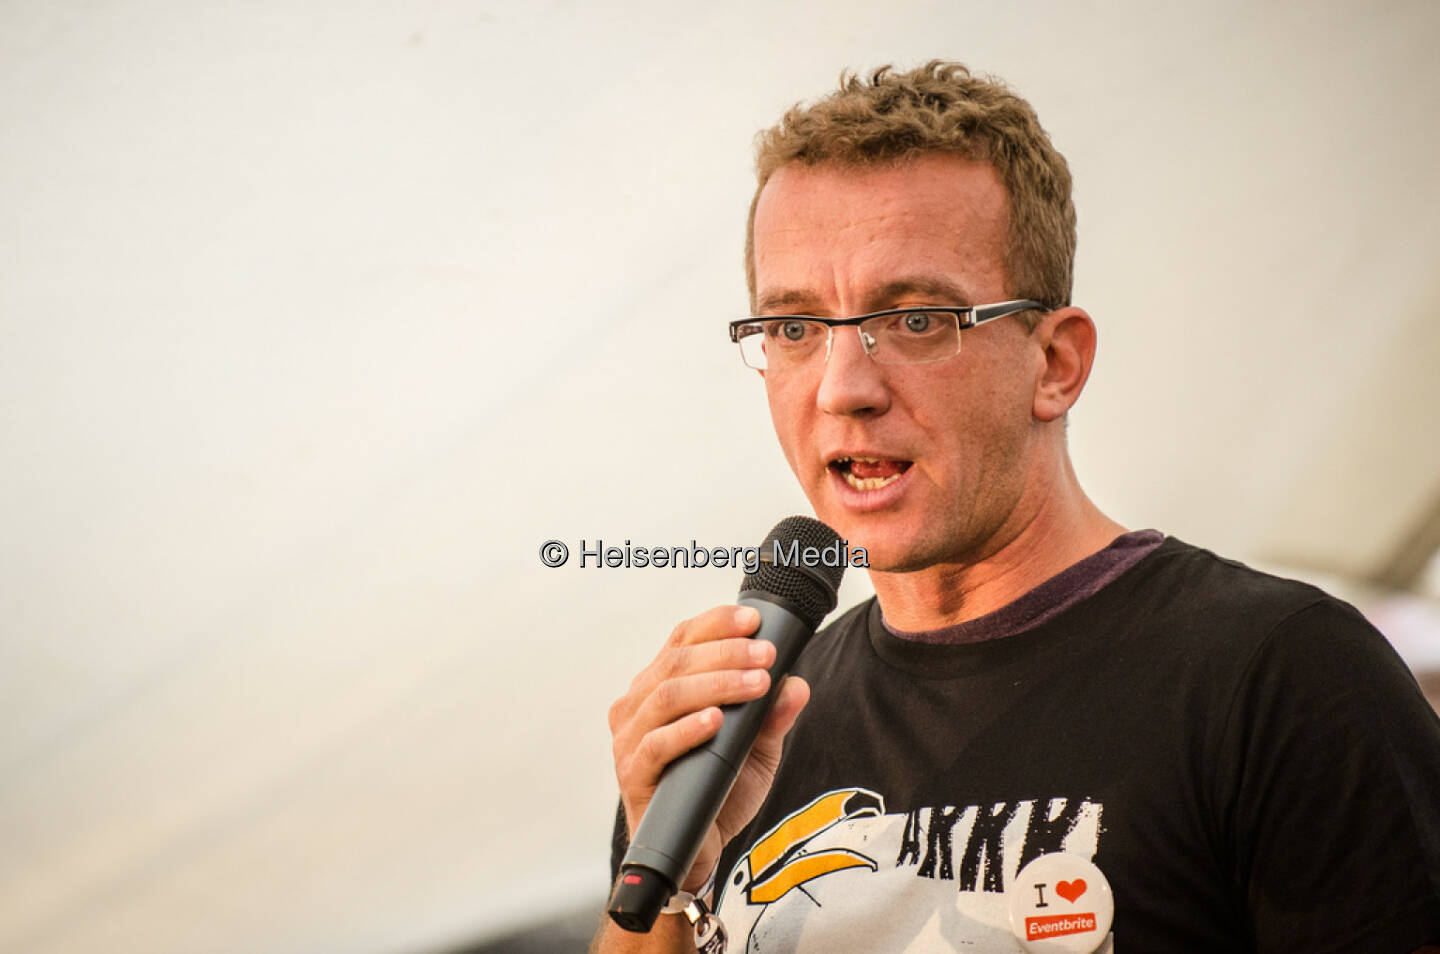 Renaud Visage – The European Pirate Summit – Cologne, Germany, August 26, 2013